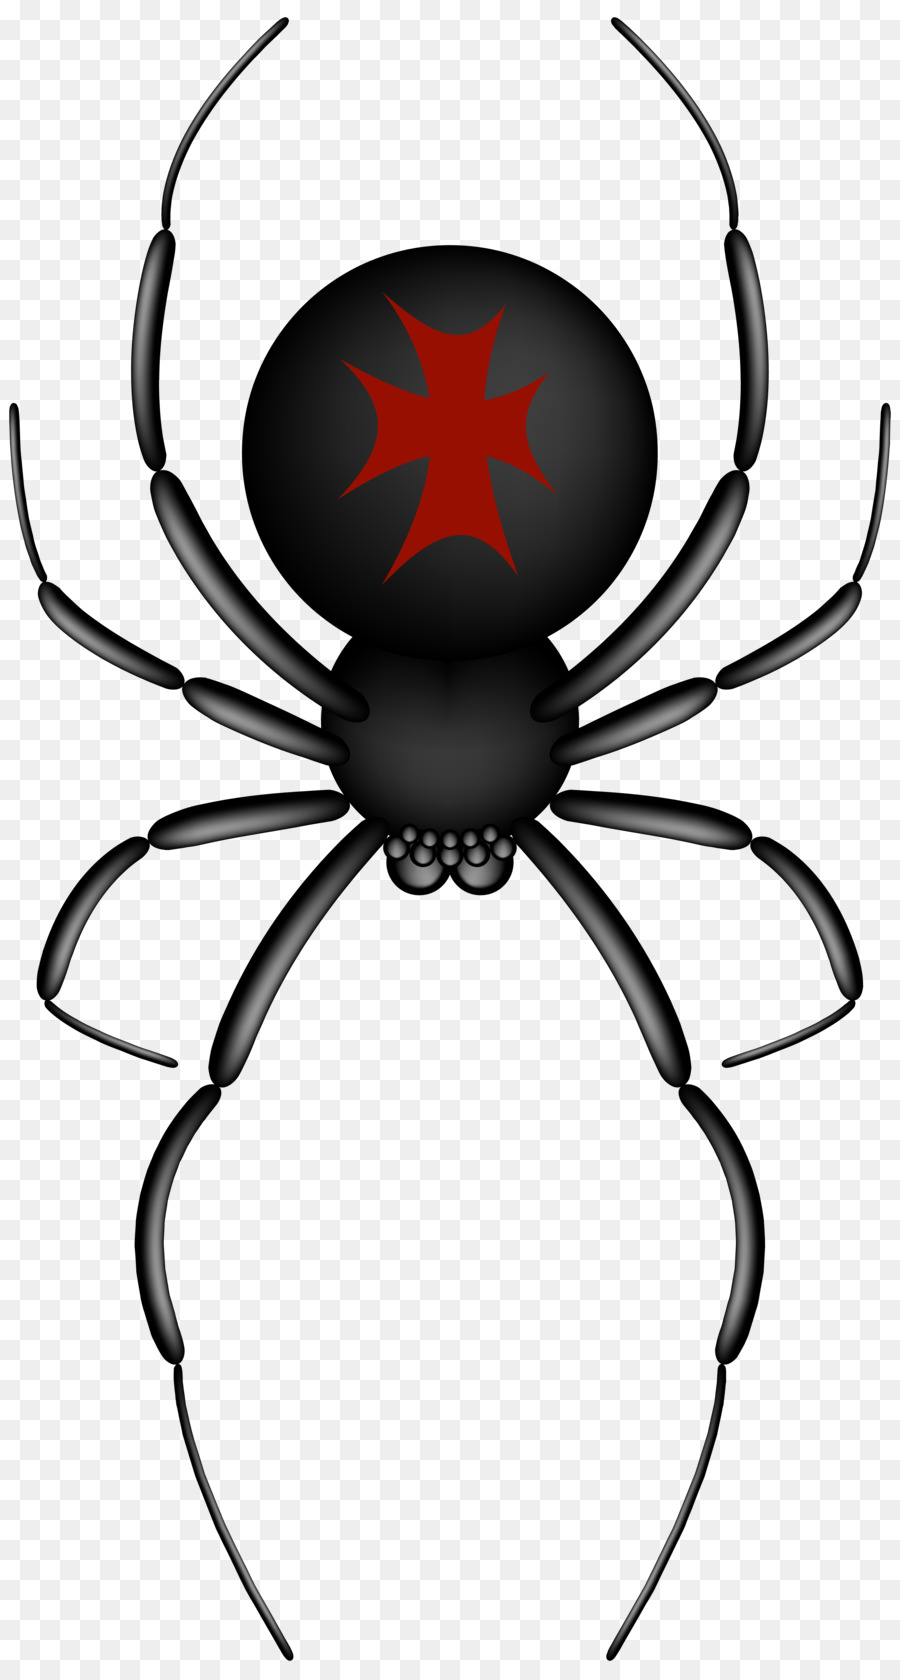 Insects & Spiders Spider web Clip art - spider png download - 4292*8000 - Free Transparent Spider png Download.